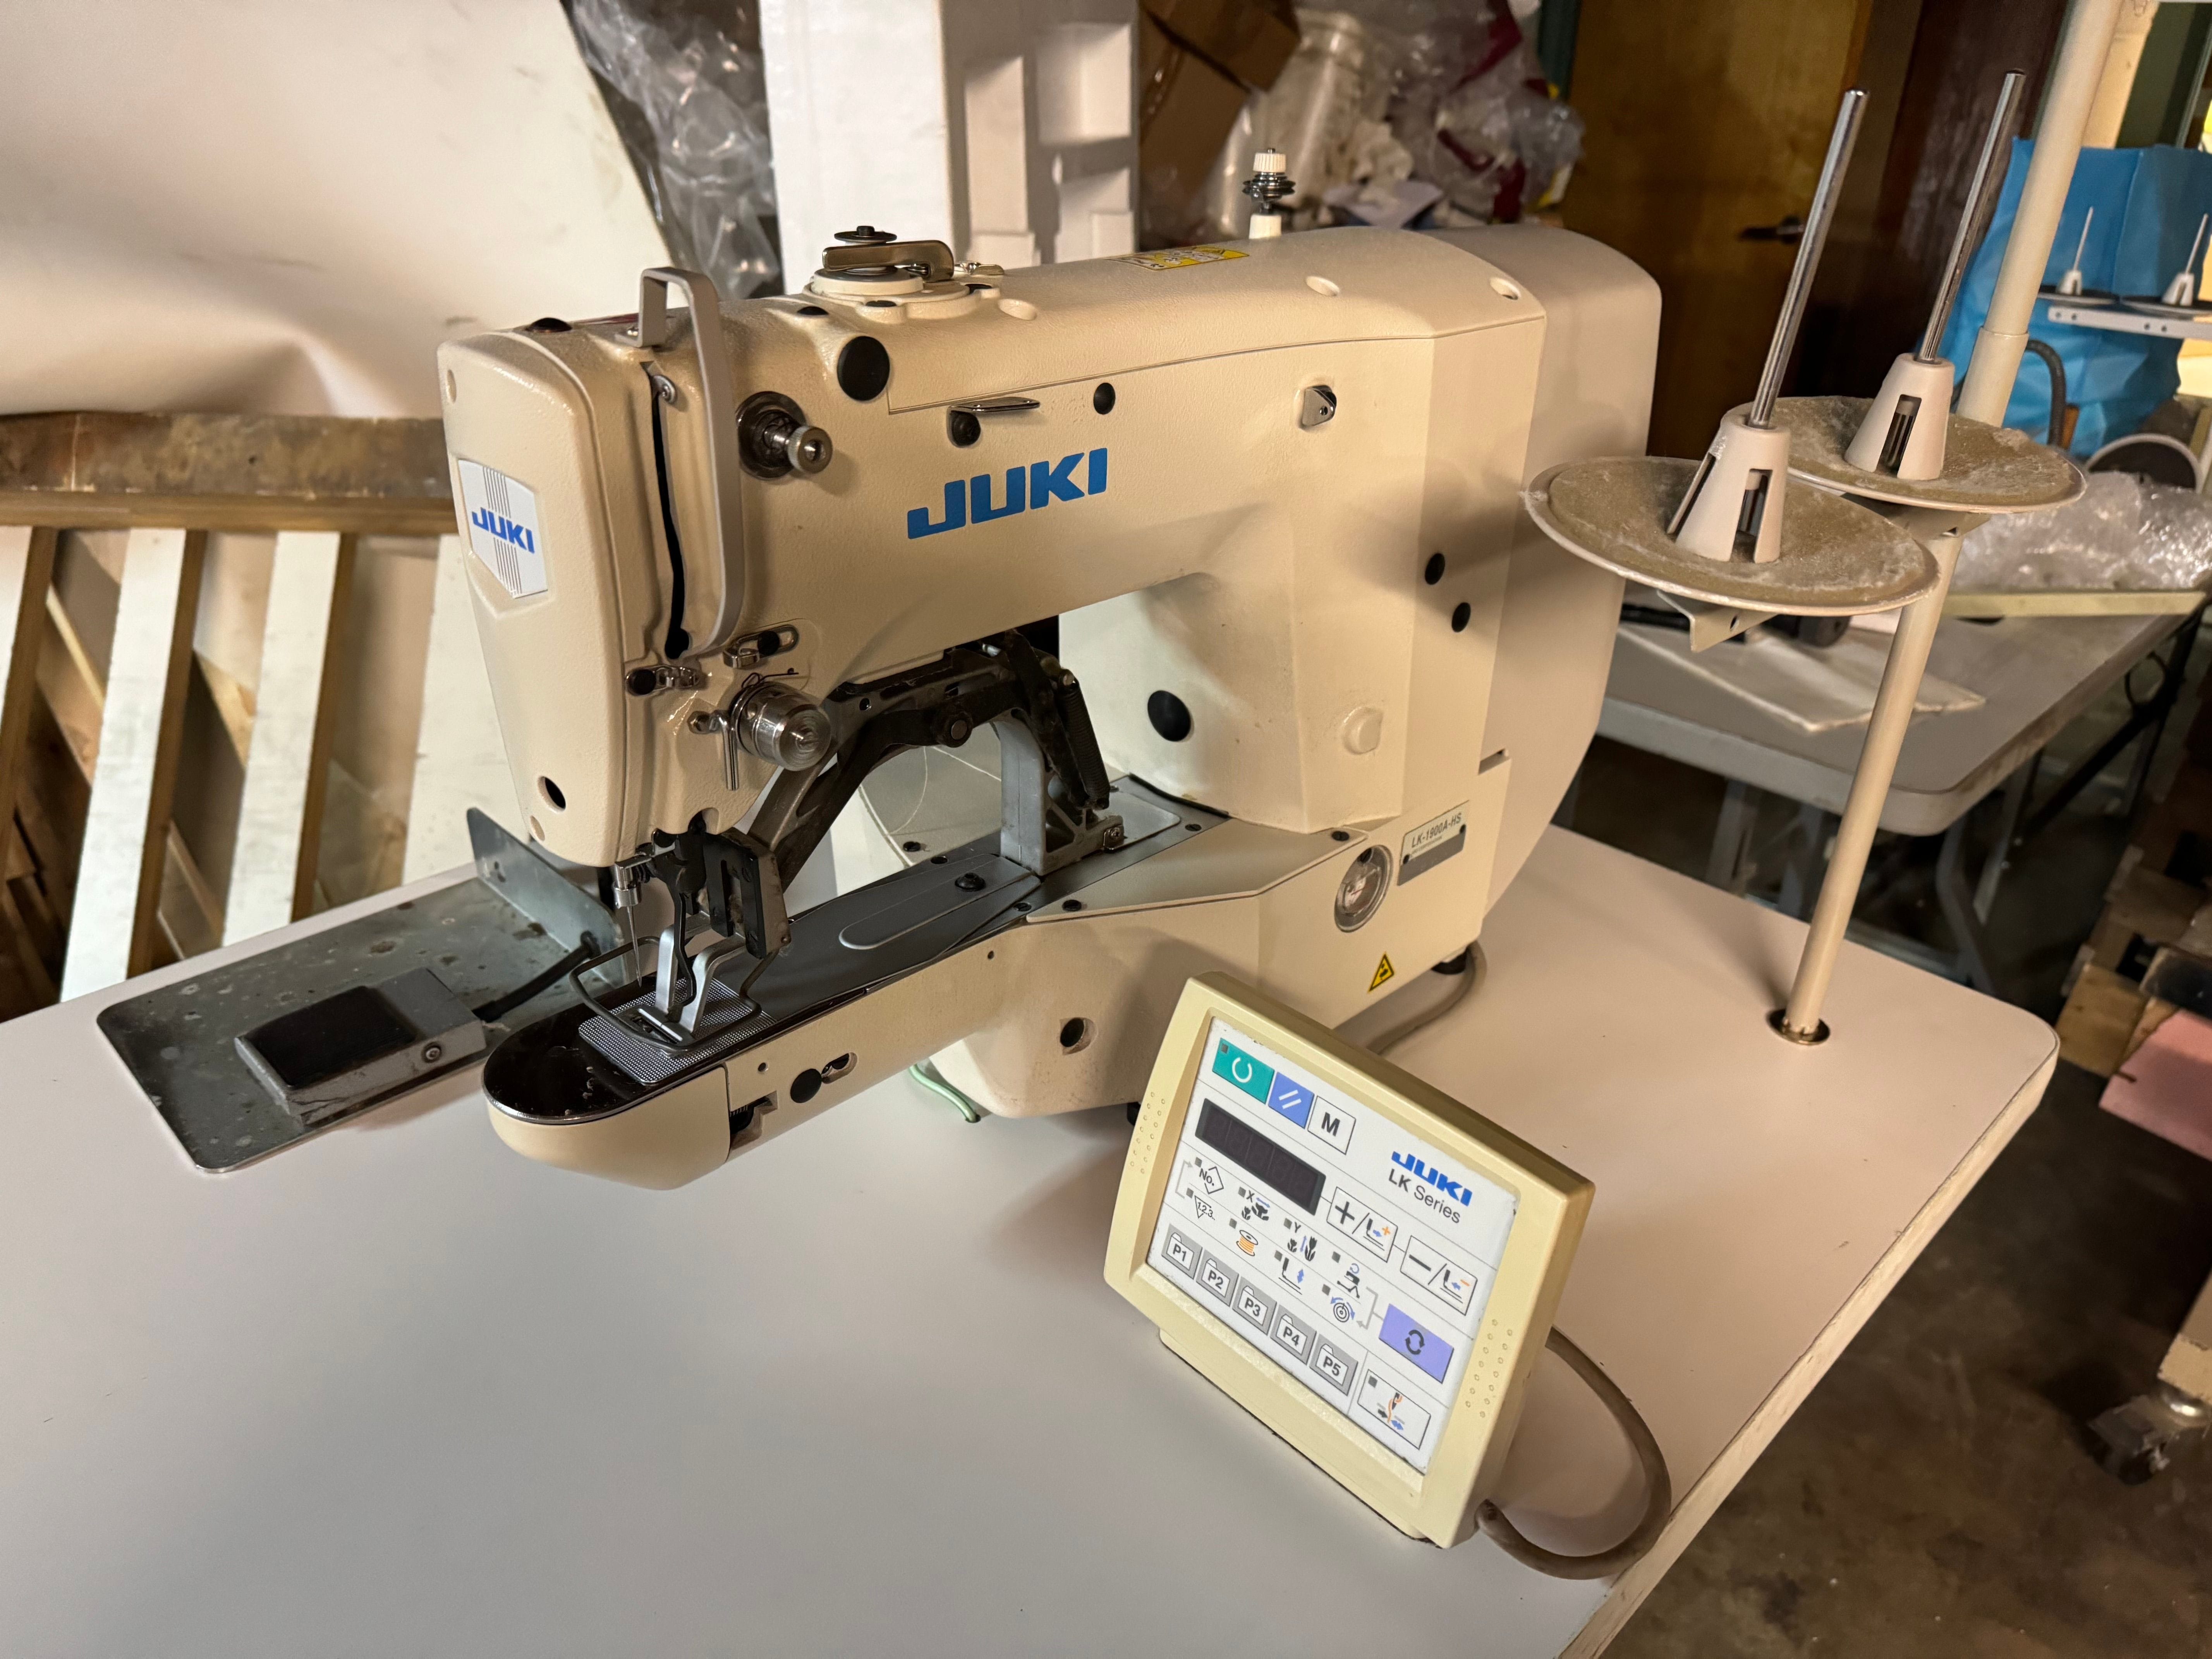 JUKI LK-1920HA
ELECTRONIC BARTACK
HEAVY MATERIALS
SEWING AREA: 40mm X 30mm
COMPLETE